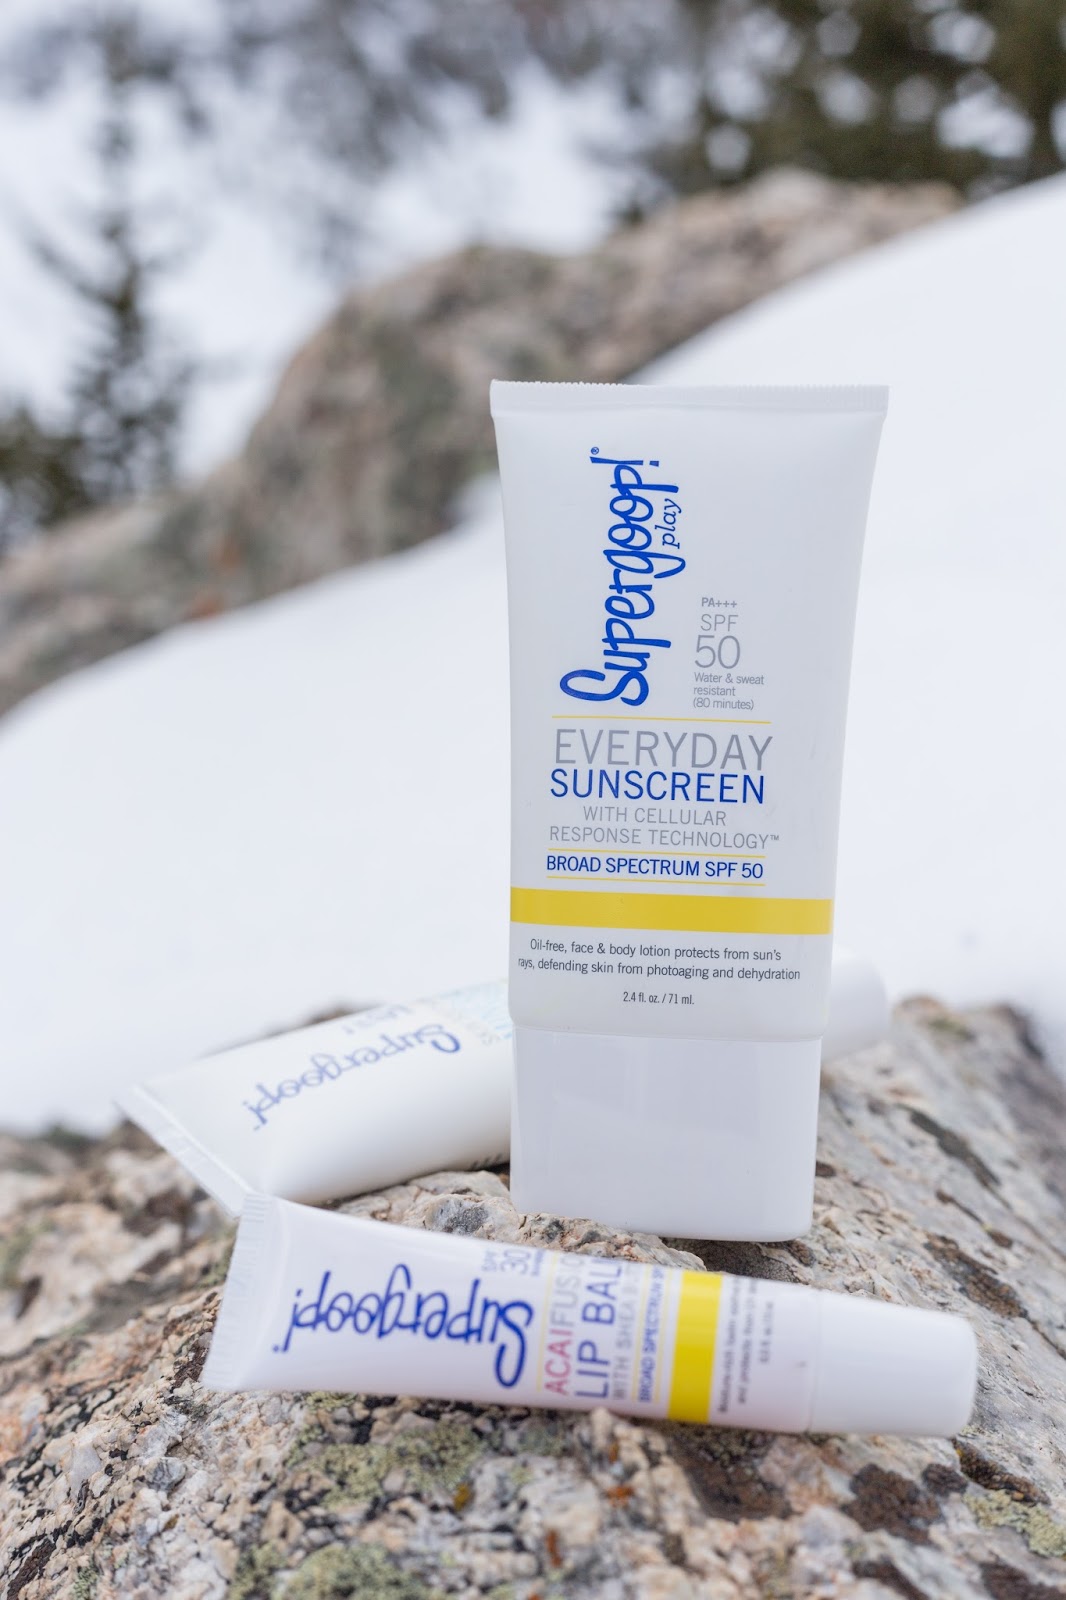 Things To Do In Breckenridge With Supergoop by popular Colorado blogger Eat Pray Wear Love